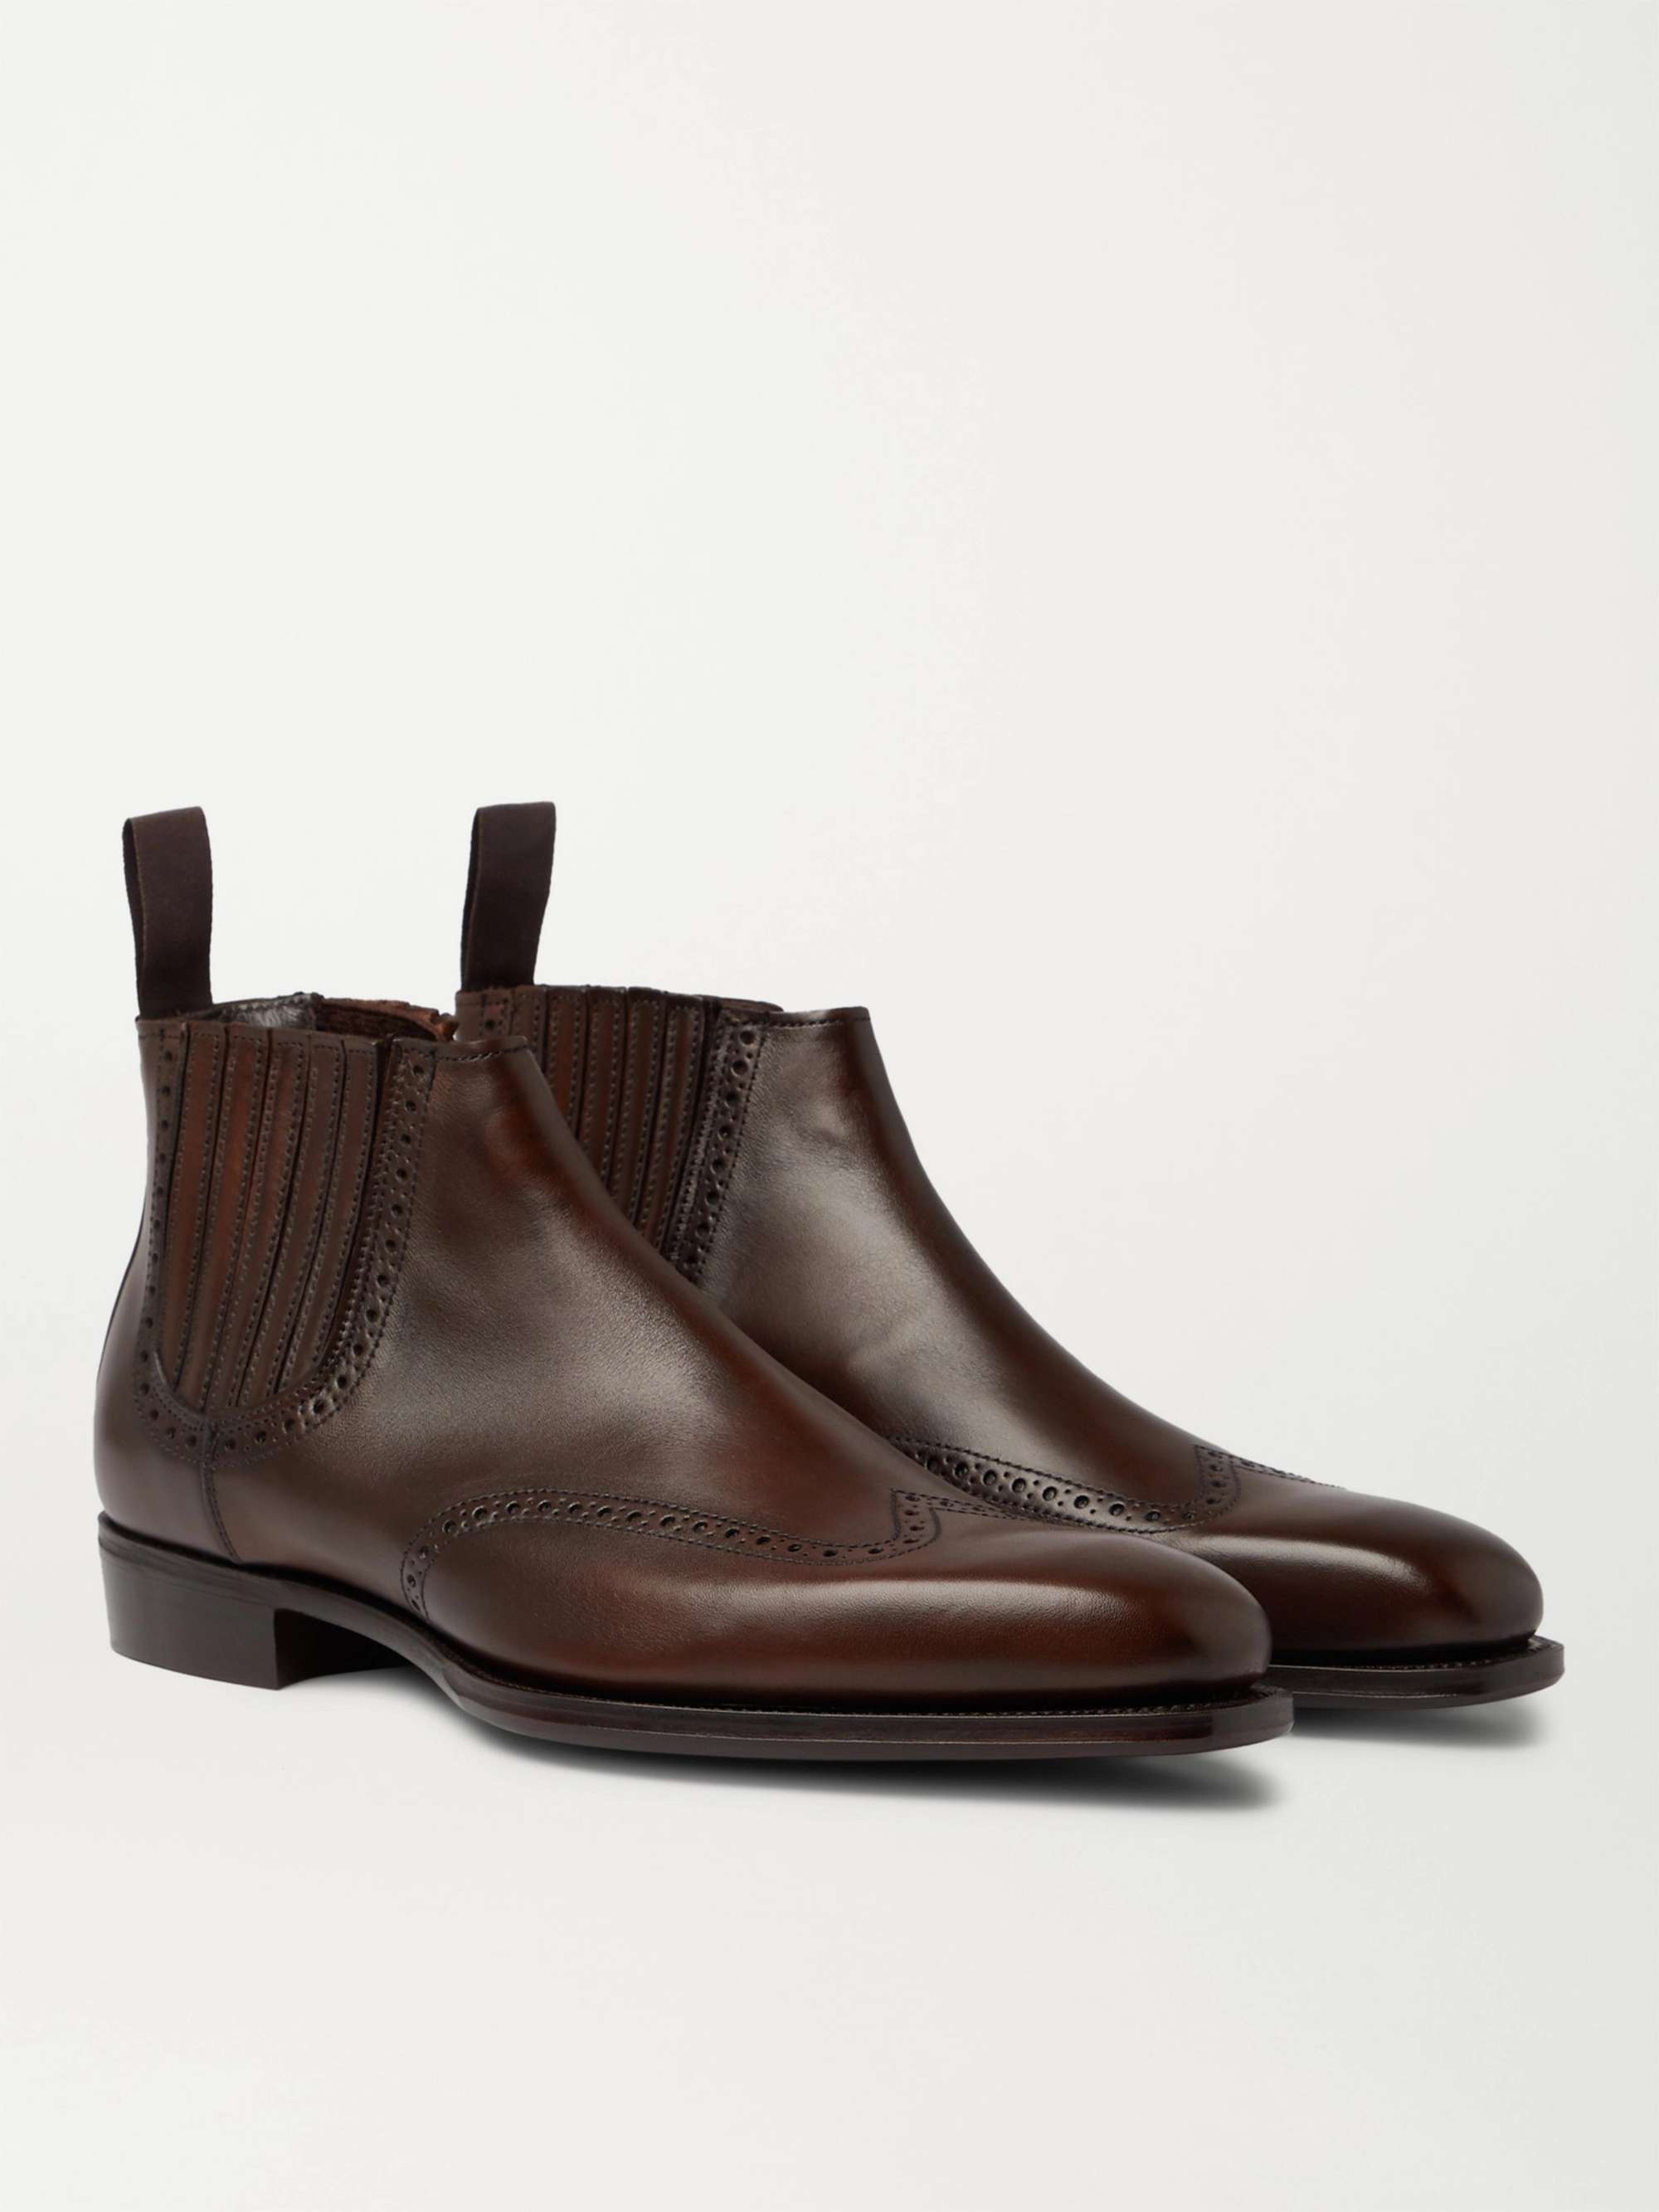 KINGSMAN + George Cleverley Veronique Leather Brogue Chelsea Boots